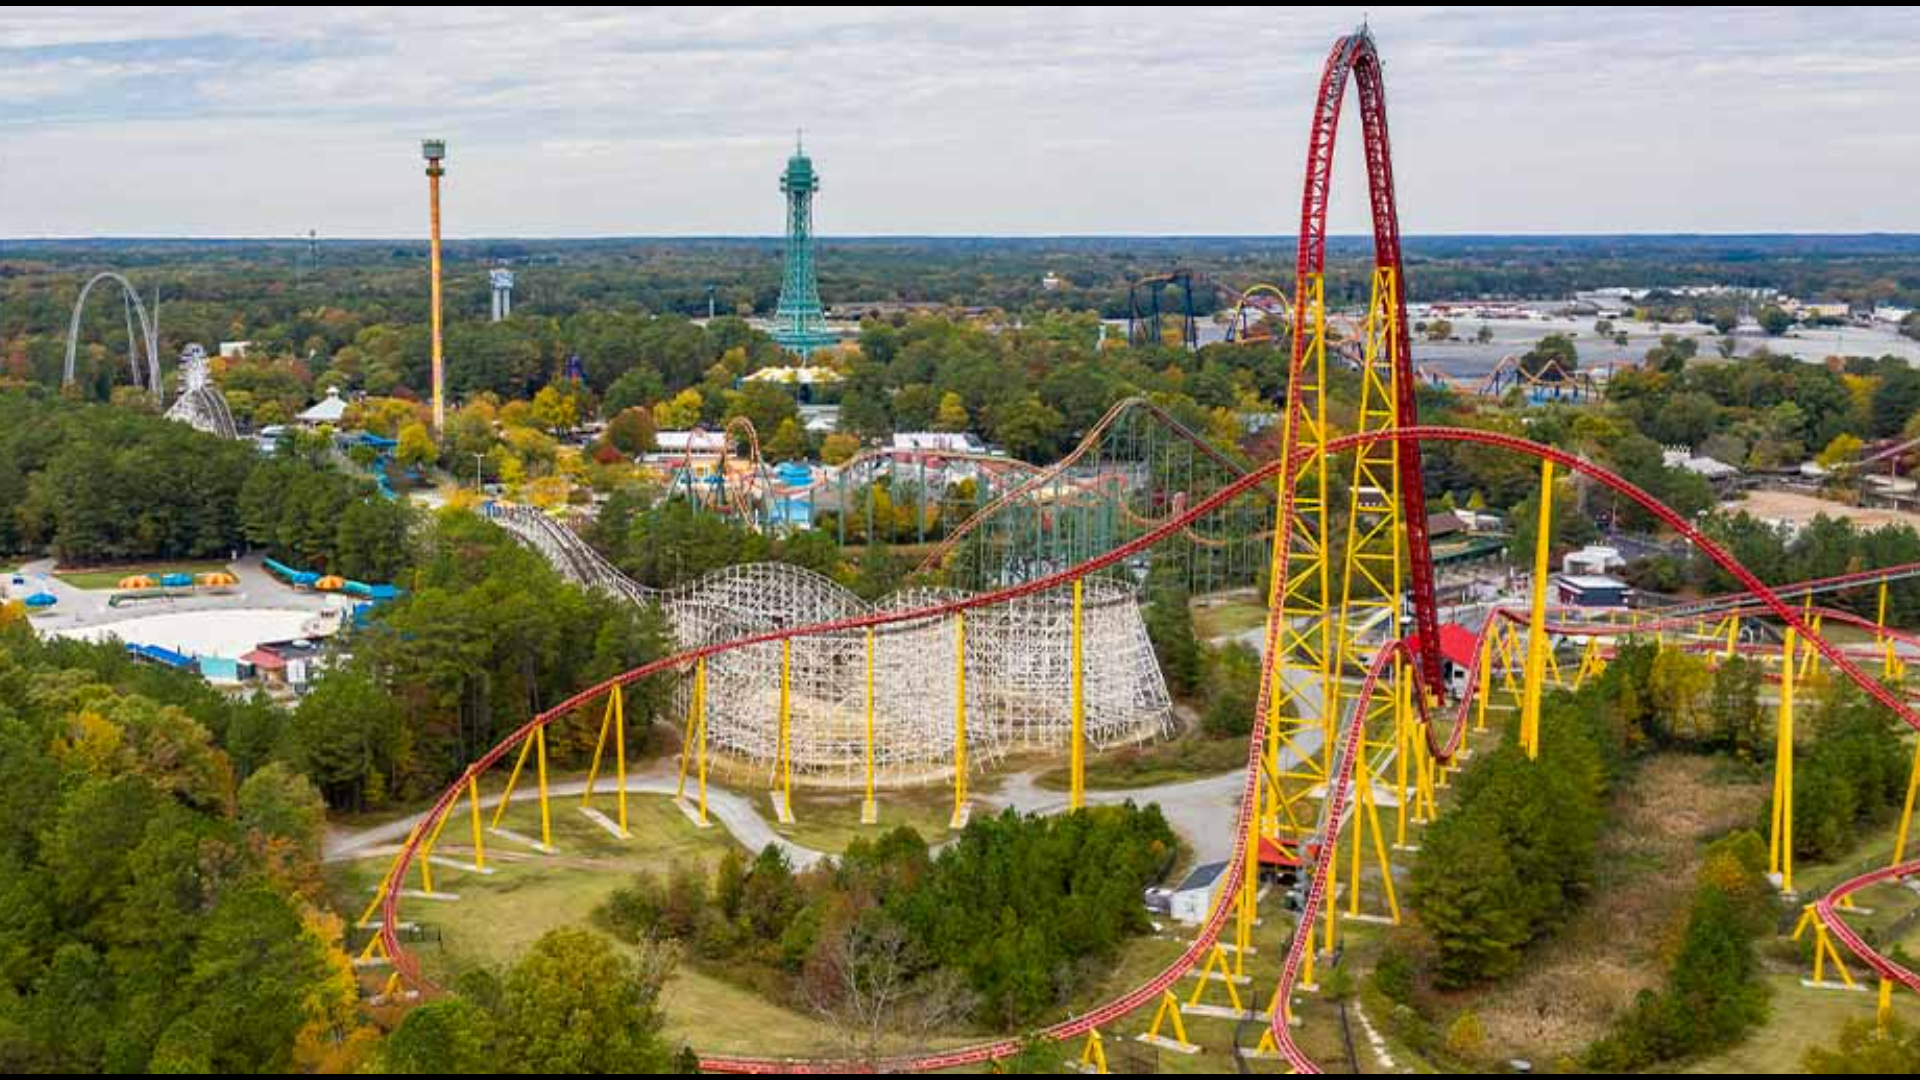 Kings Dominion amusement park in Virginia will hire more than 2,100 workers for the season